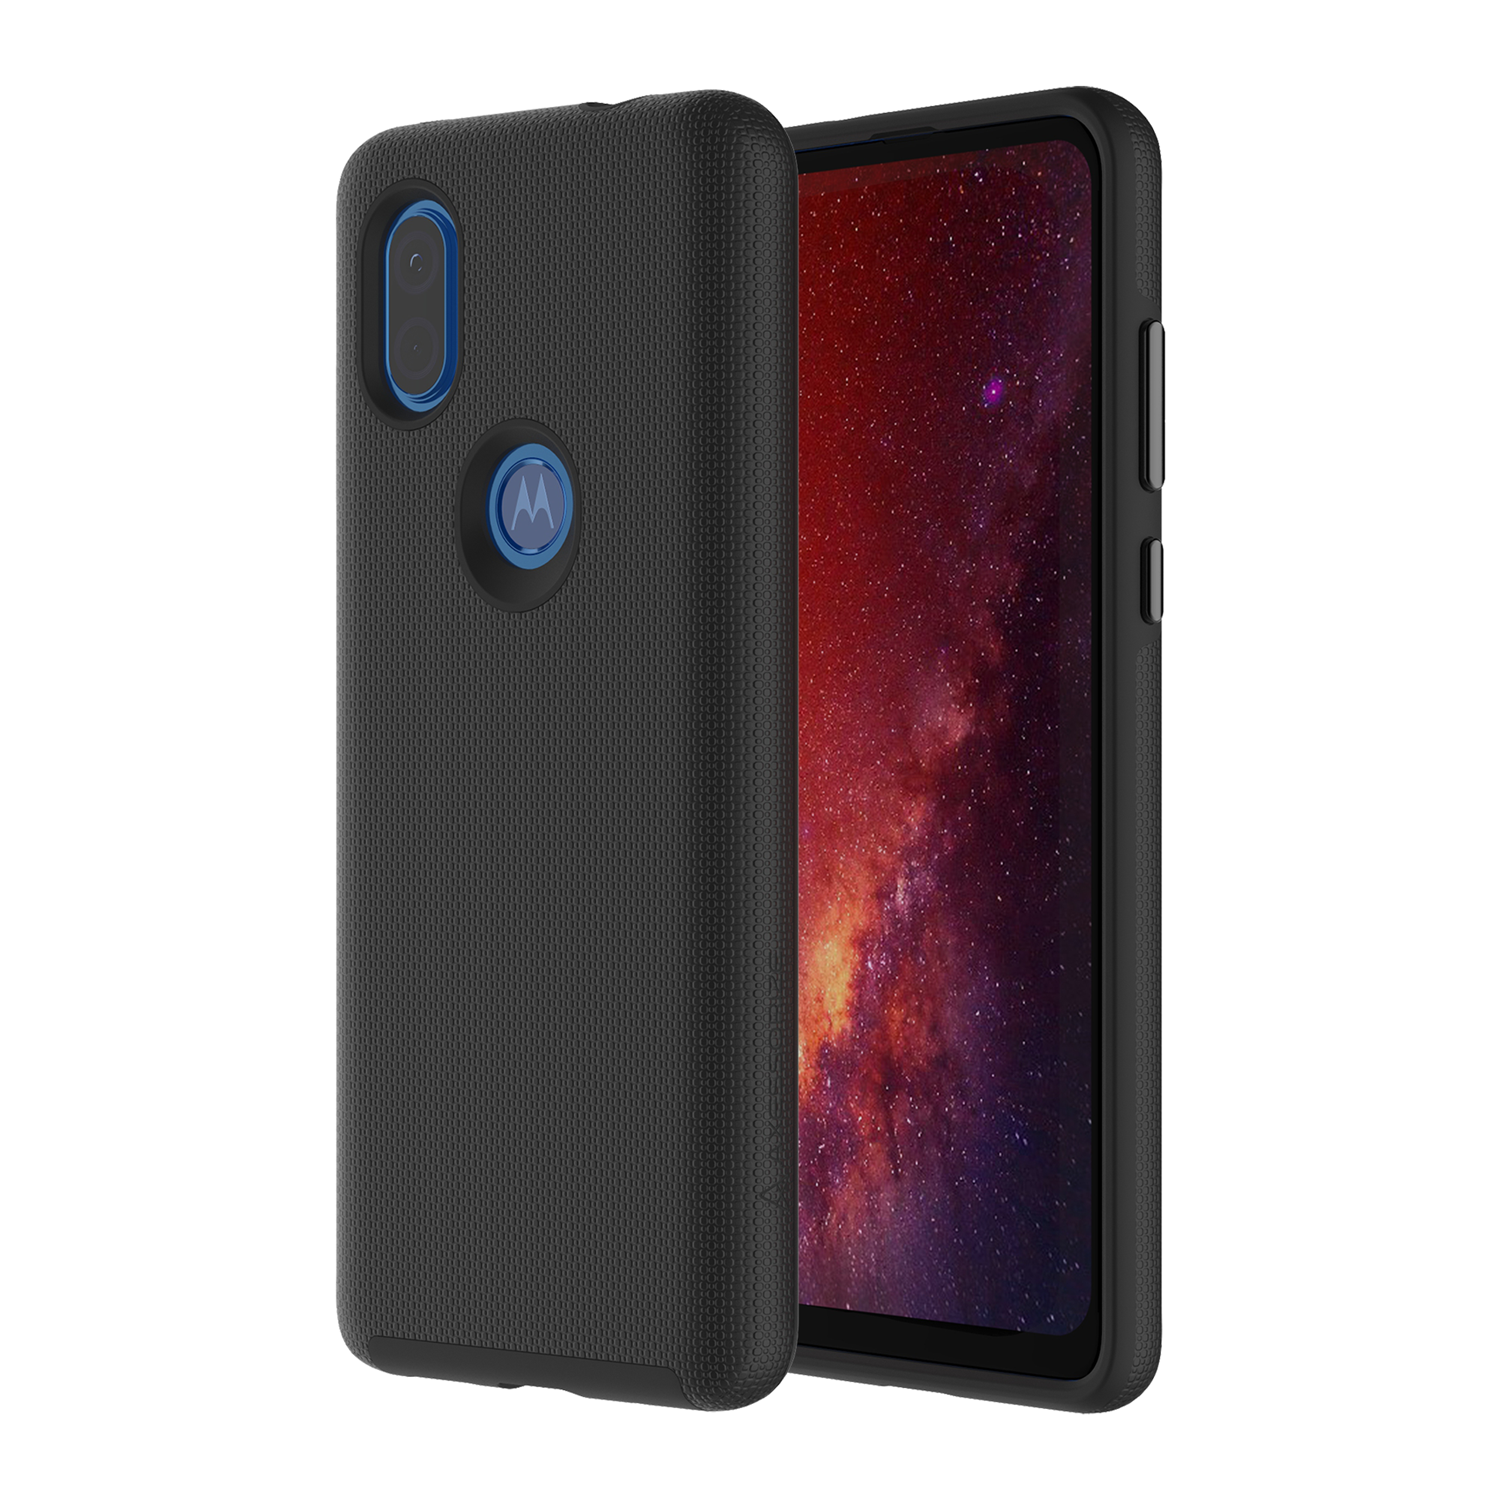 Axessorize PROTech Dual-Layered Anti-Shock Case with Military-Grade Durability for Motorola Moto One Vision | Black